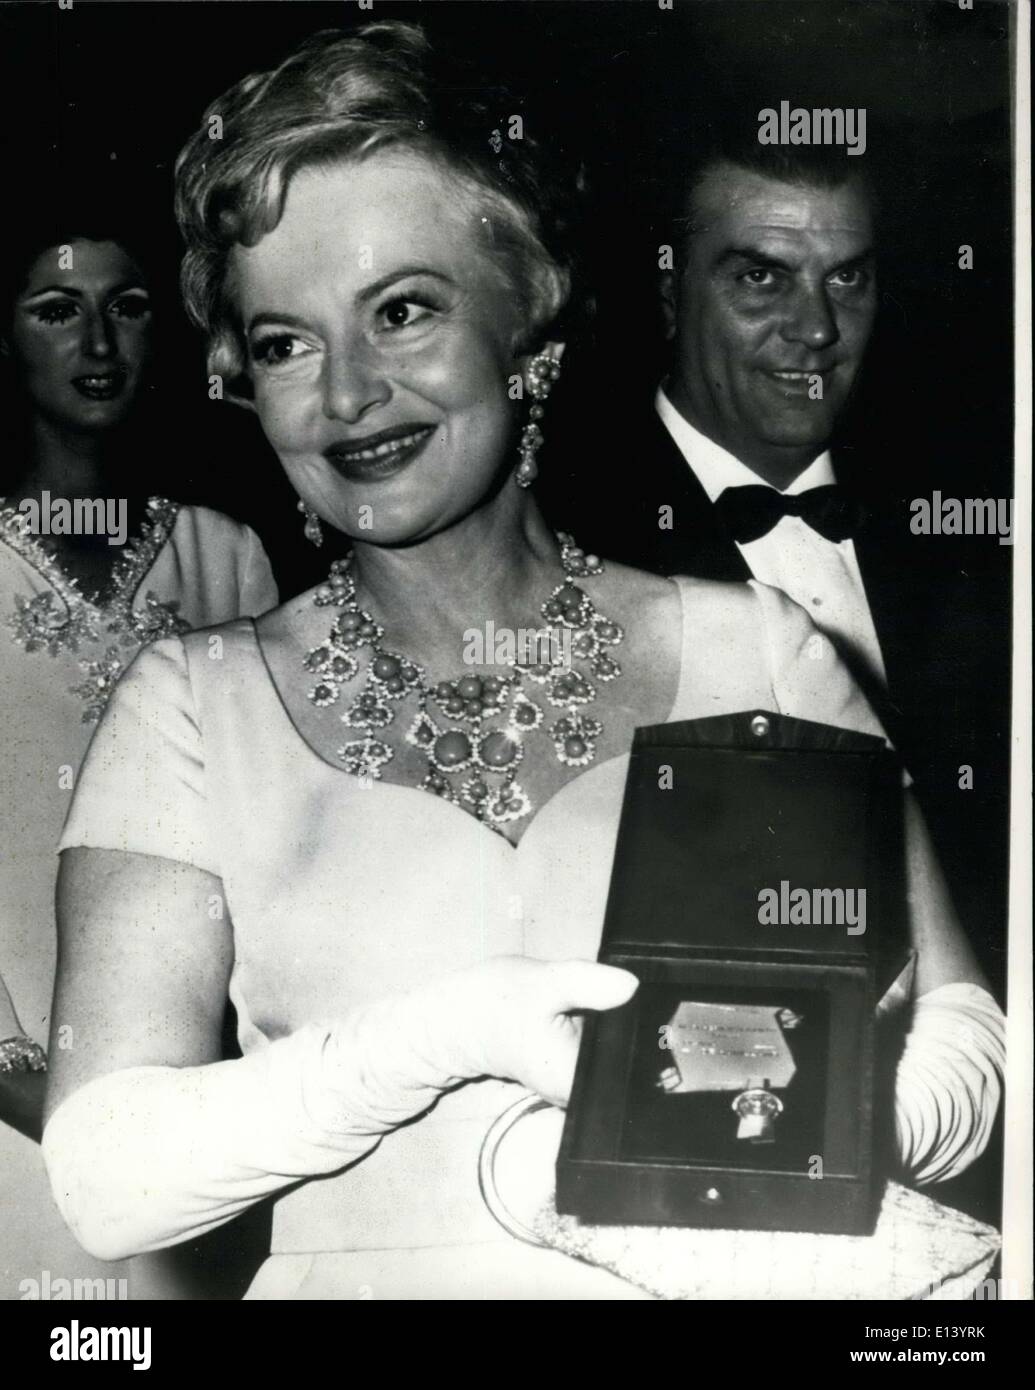 Mar. 31, 2012 - The Annual ''Silver Mask'' Awards in Rome : Stars and personalities from all over the world gathered at Rome's Sistina Theatre for the annual presentation of the ''Silver Mask'' awards. Photo shows American Actress Olivia De Havilland, who is in Rome to film ''The Adventure''s '' with her ''Silver Mask'' award after the presentation. Stock Photo